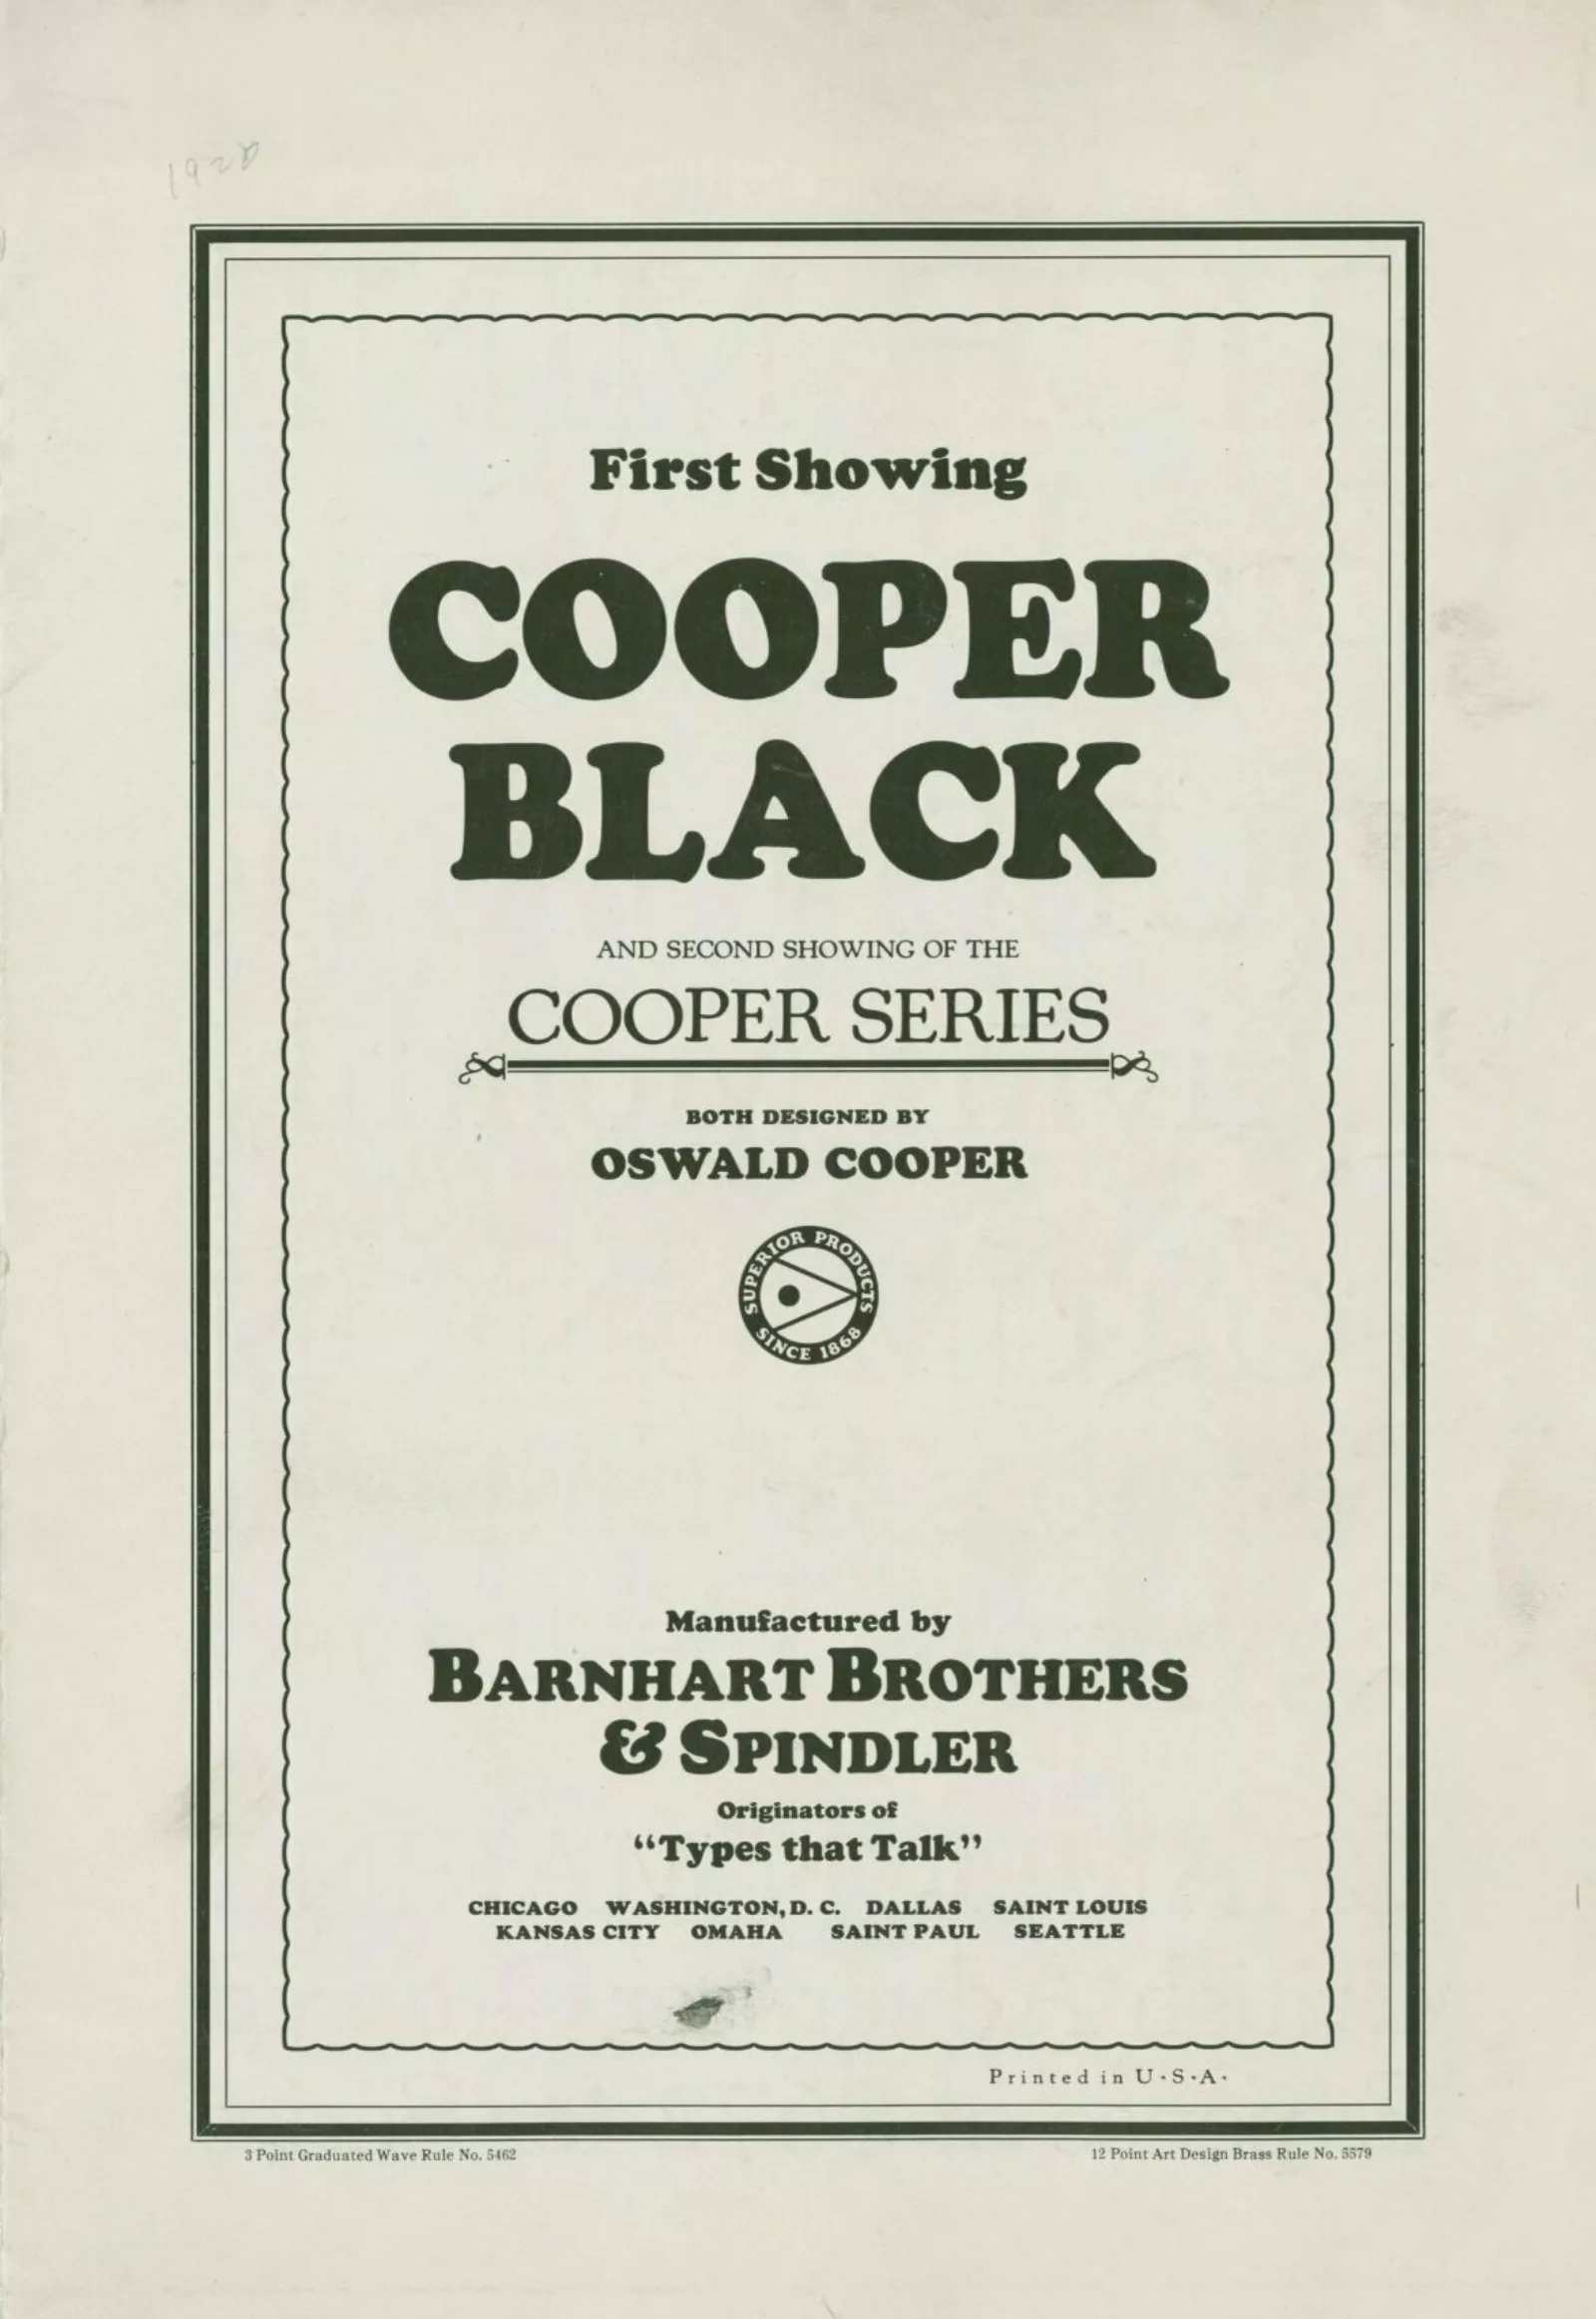 Advertising brochure for Cooper Black. The title on the cover says "First showing, Cooper Black."